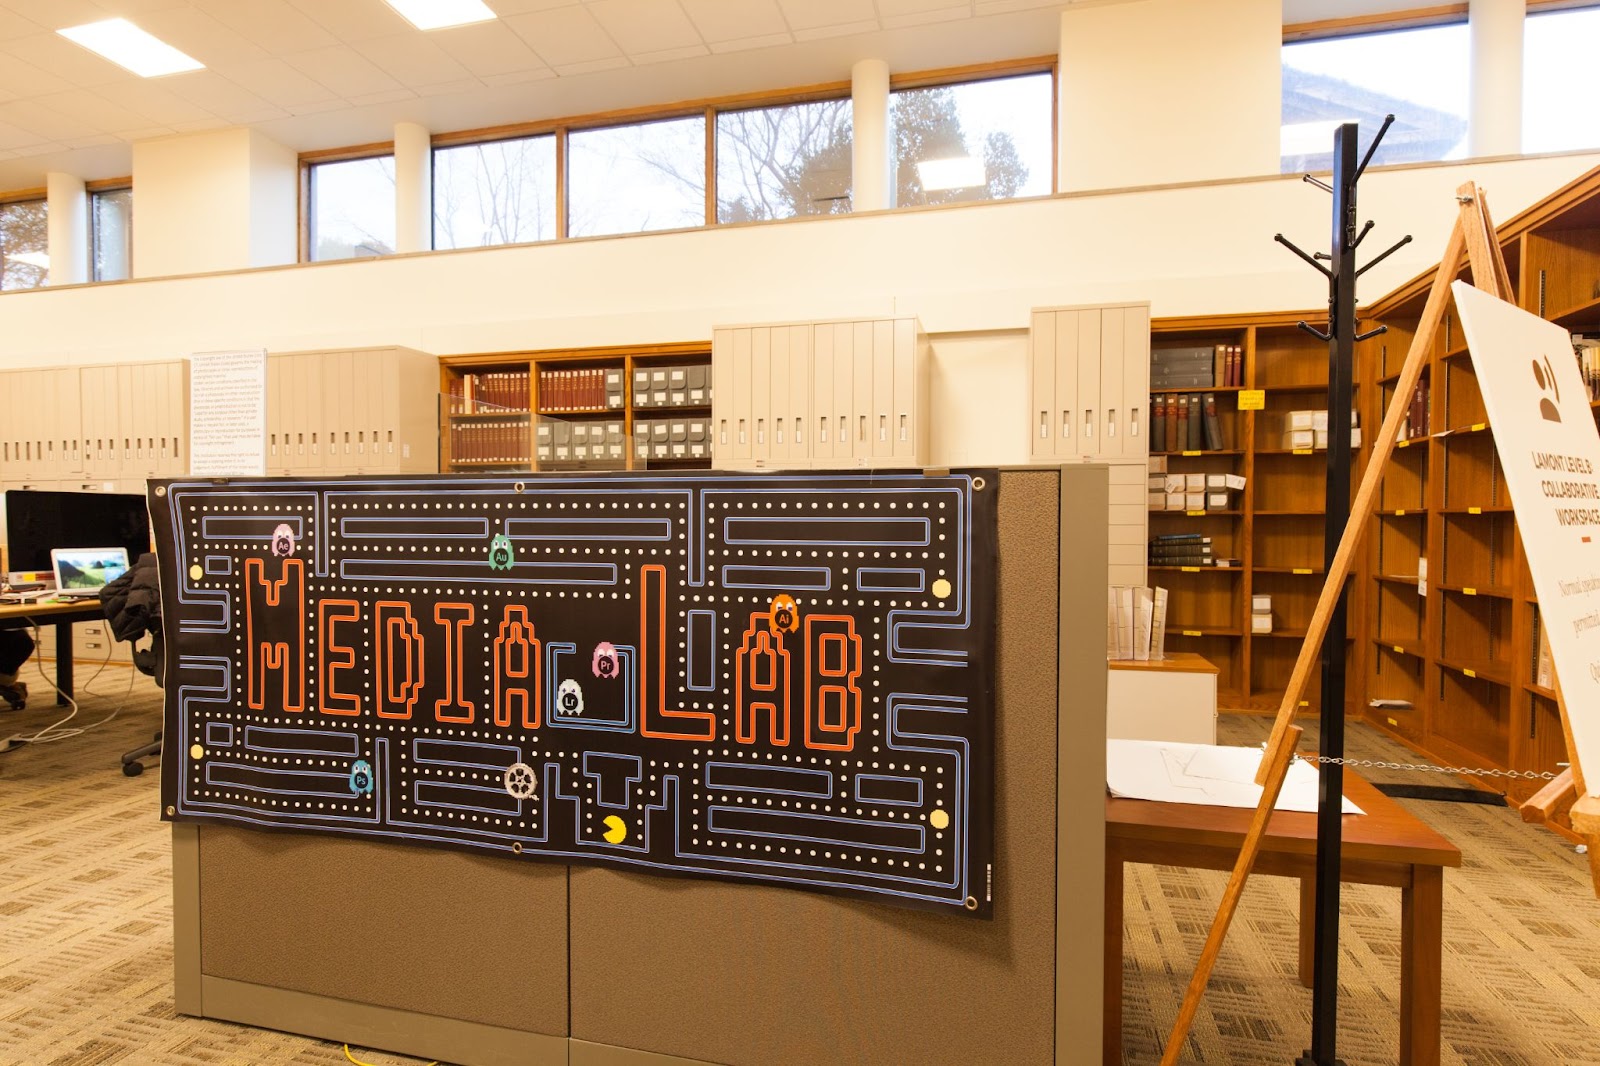 a picture of a sign saying "media lab"